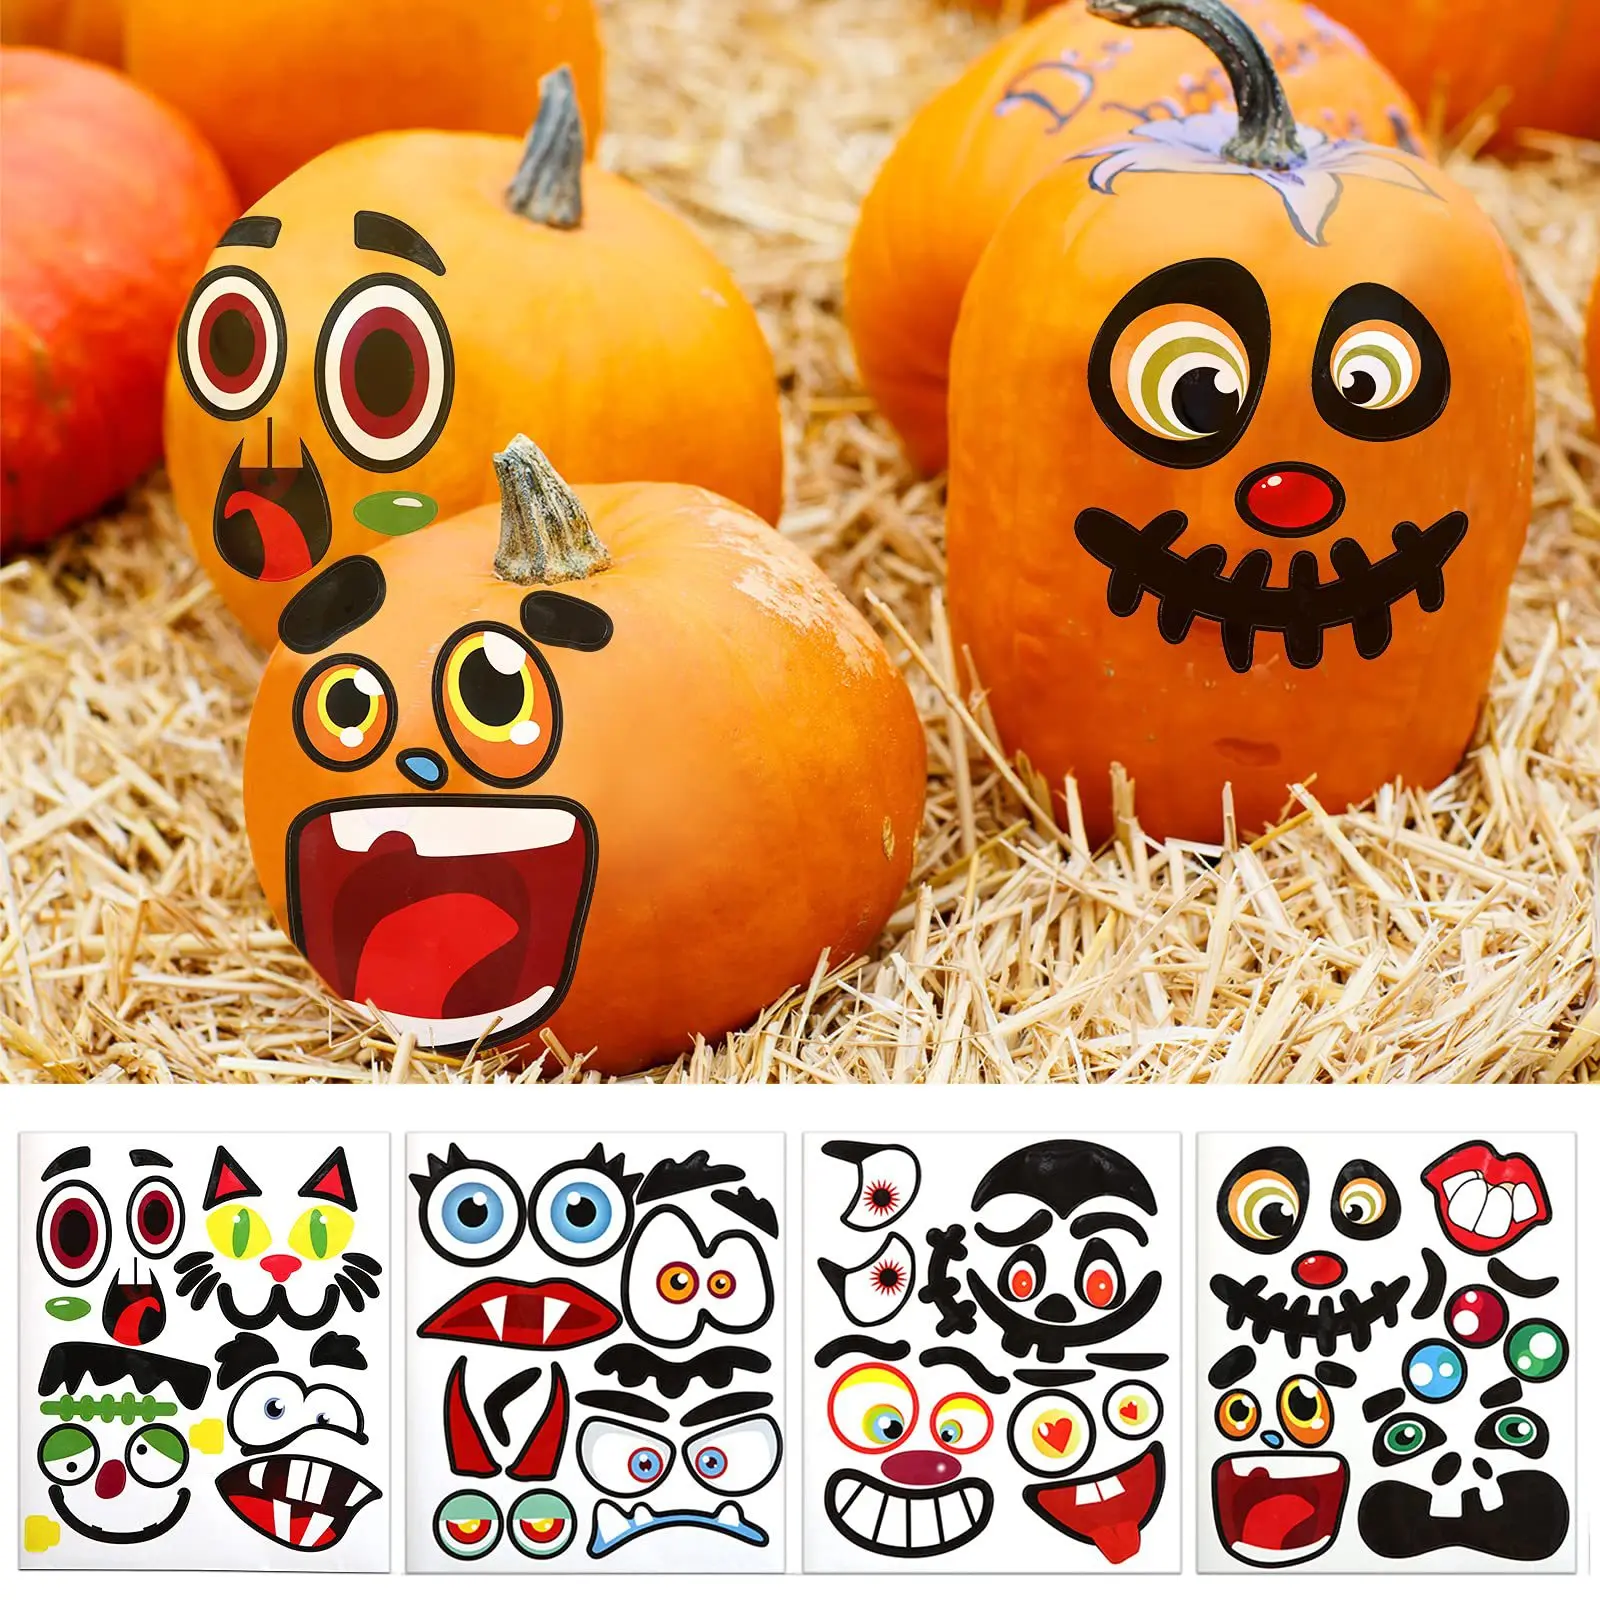 

16/8 Sheets Halloween Stickers Expression Pumpkin Decorative DIY Sticker Ghost Face Self-adhesive Sticker Halloween Party Decor